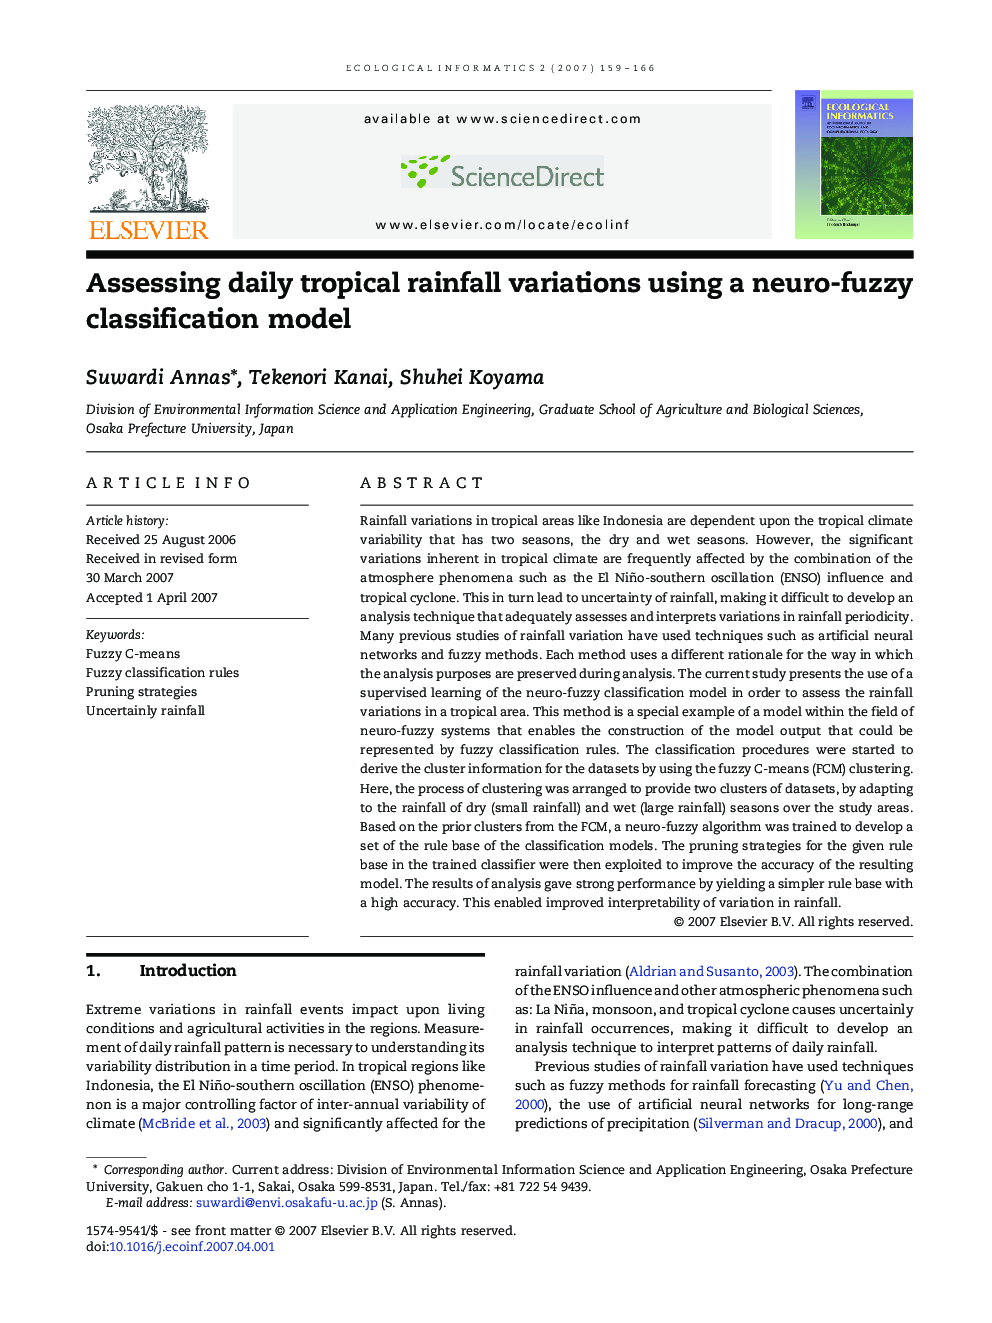 Assessing daily tropical rainfall variations using a neuro-fuzzy classification model